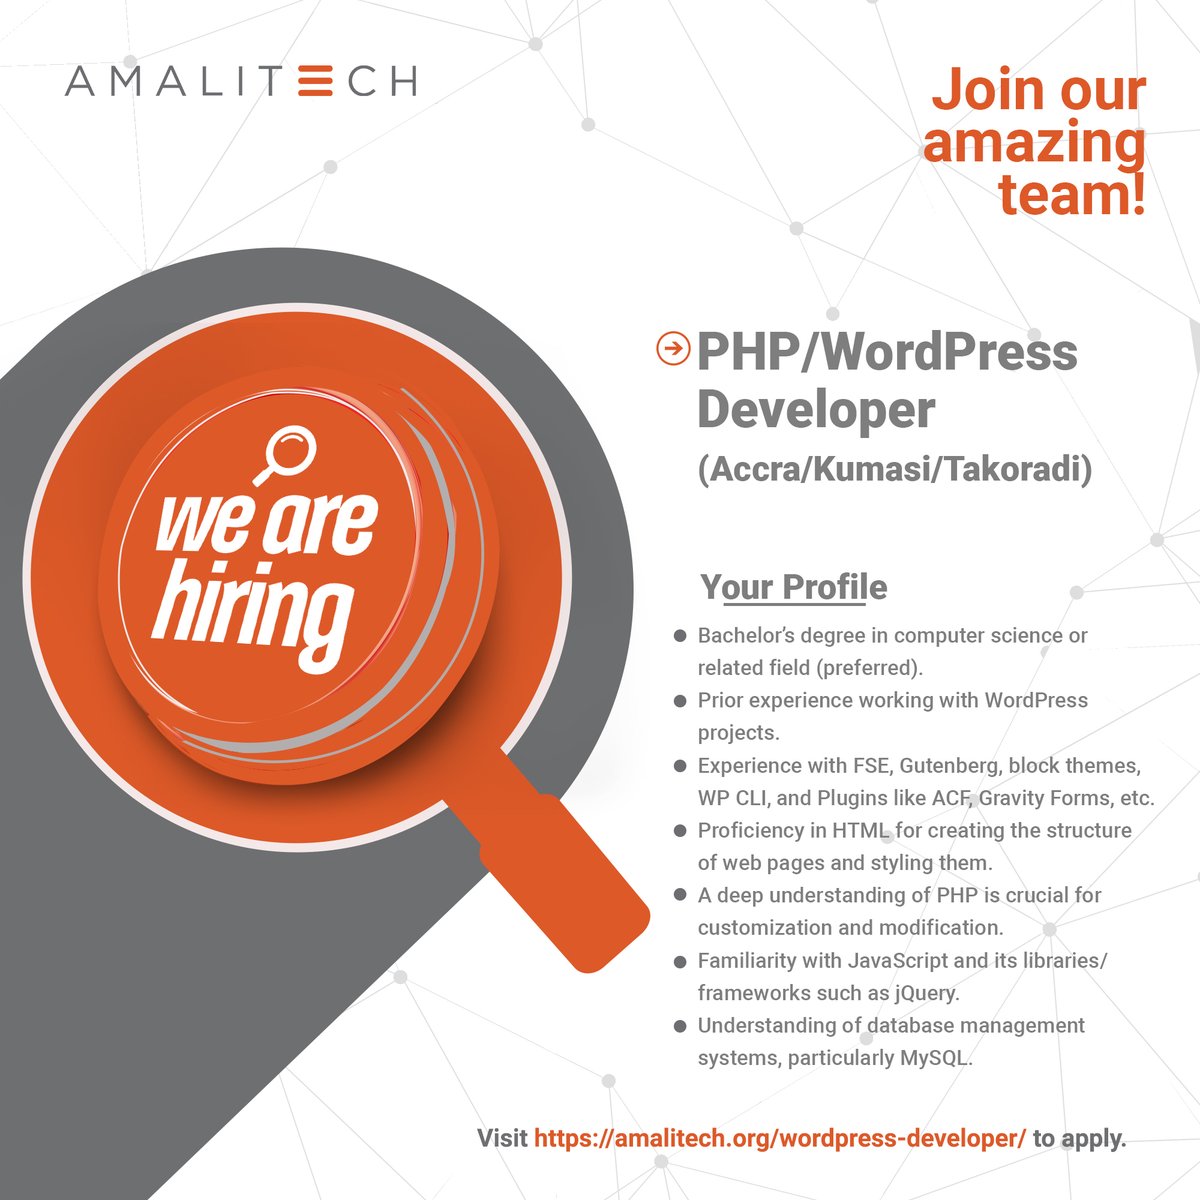 We're hiring in Kumasi, Ghana for a Professional Skills Instructor role. If you can relocate or already reside in Kumasi, apply here: amalitech.org/prof-skills-in…. 

Also, we're seeking PHP/WordPress Developers in Takoradi, Accra, and Kumasi. Be part of our dynamic team at